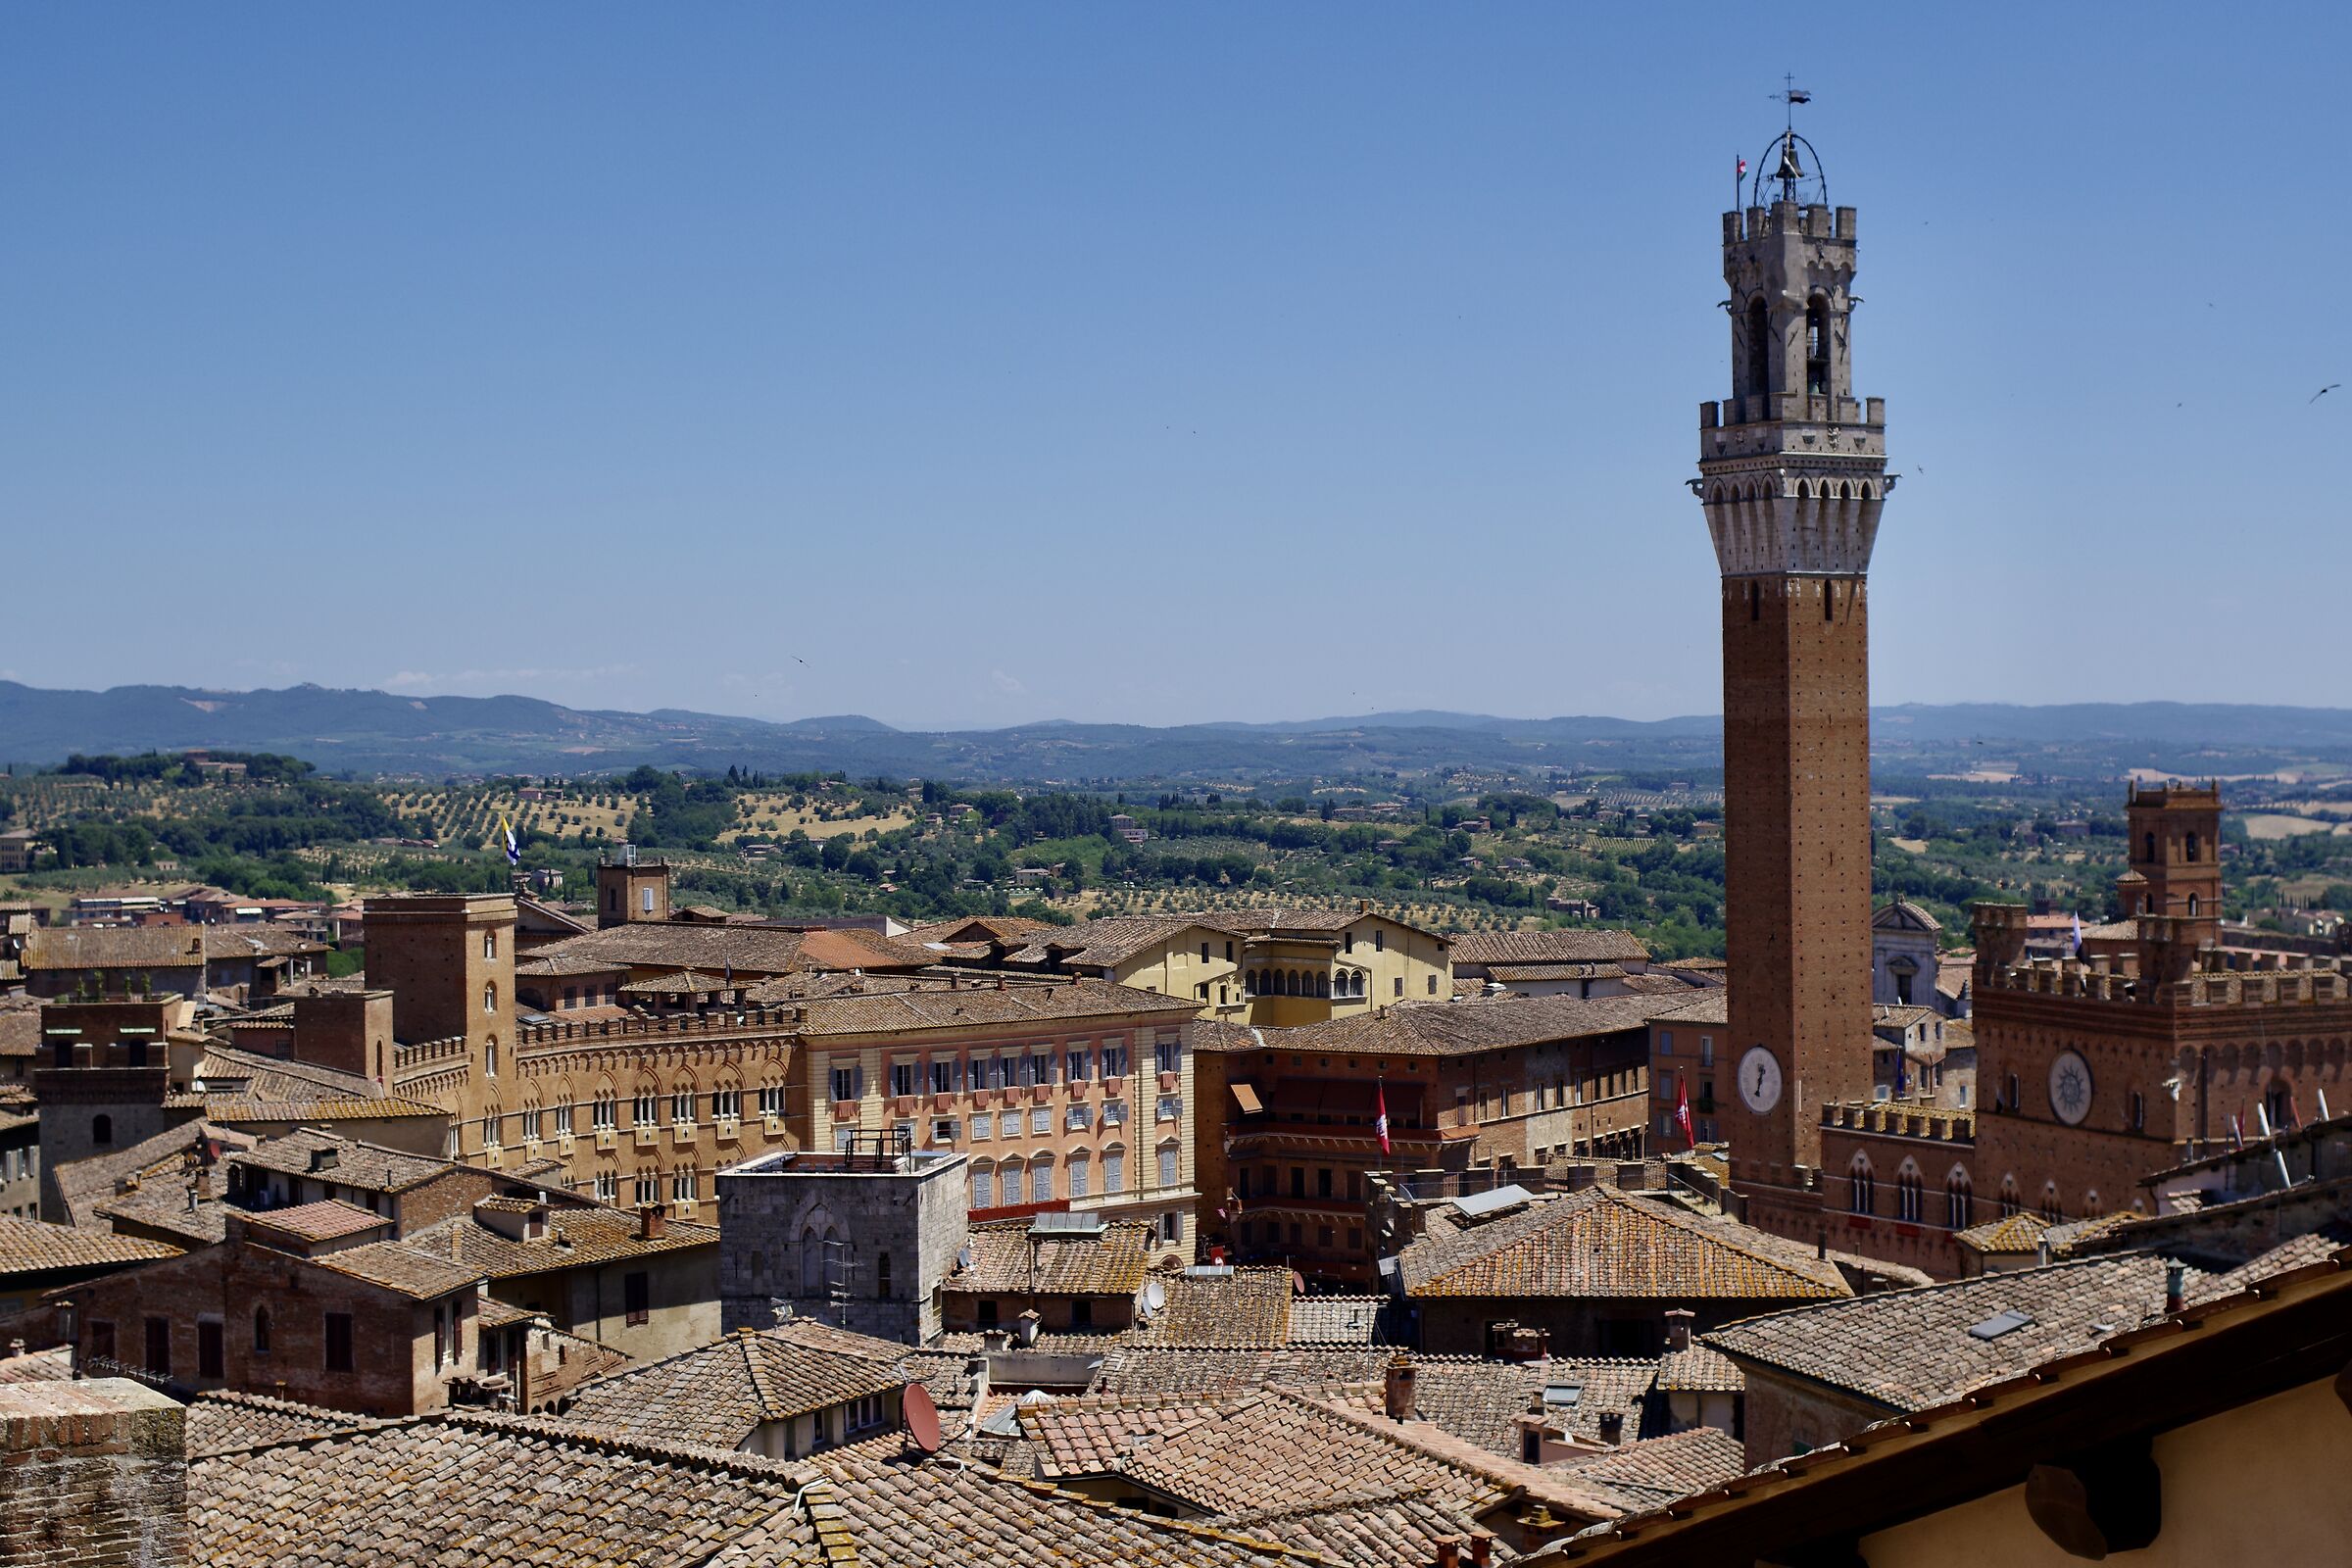 The roofs of Siena...